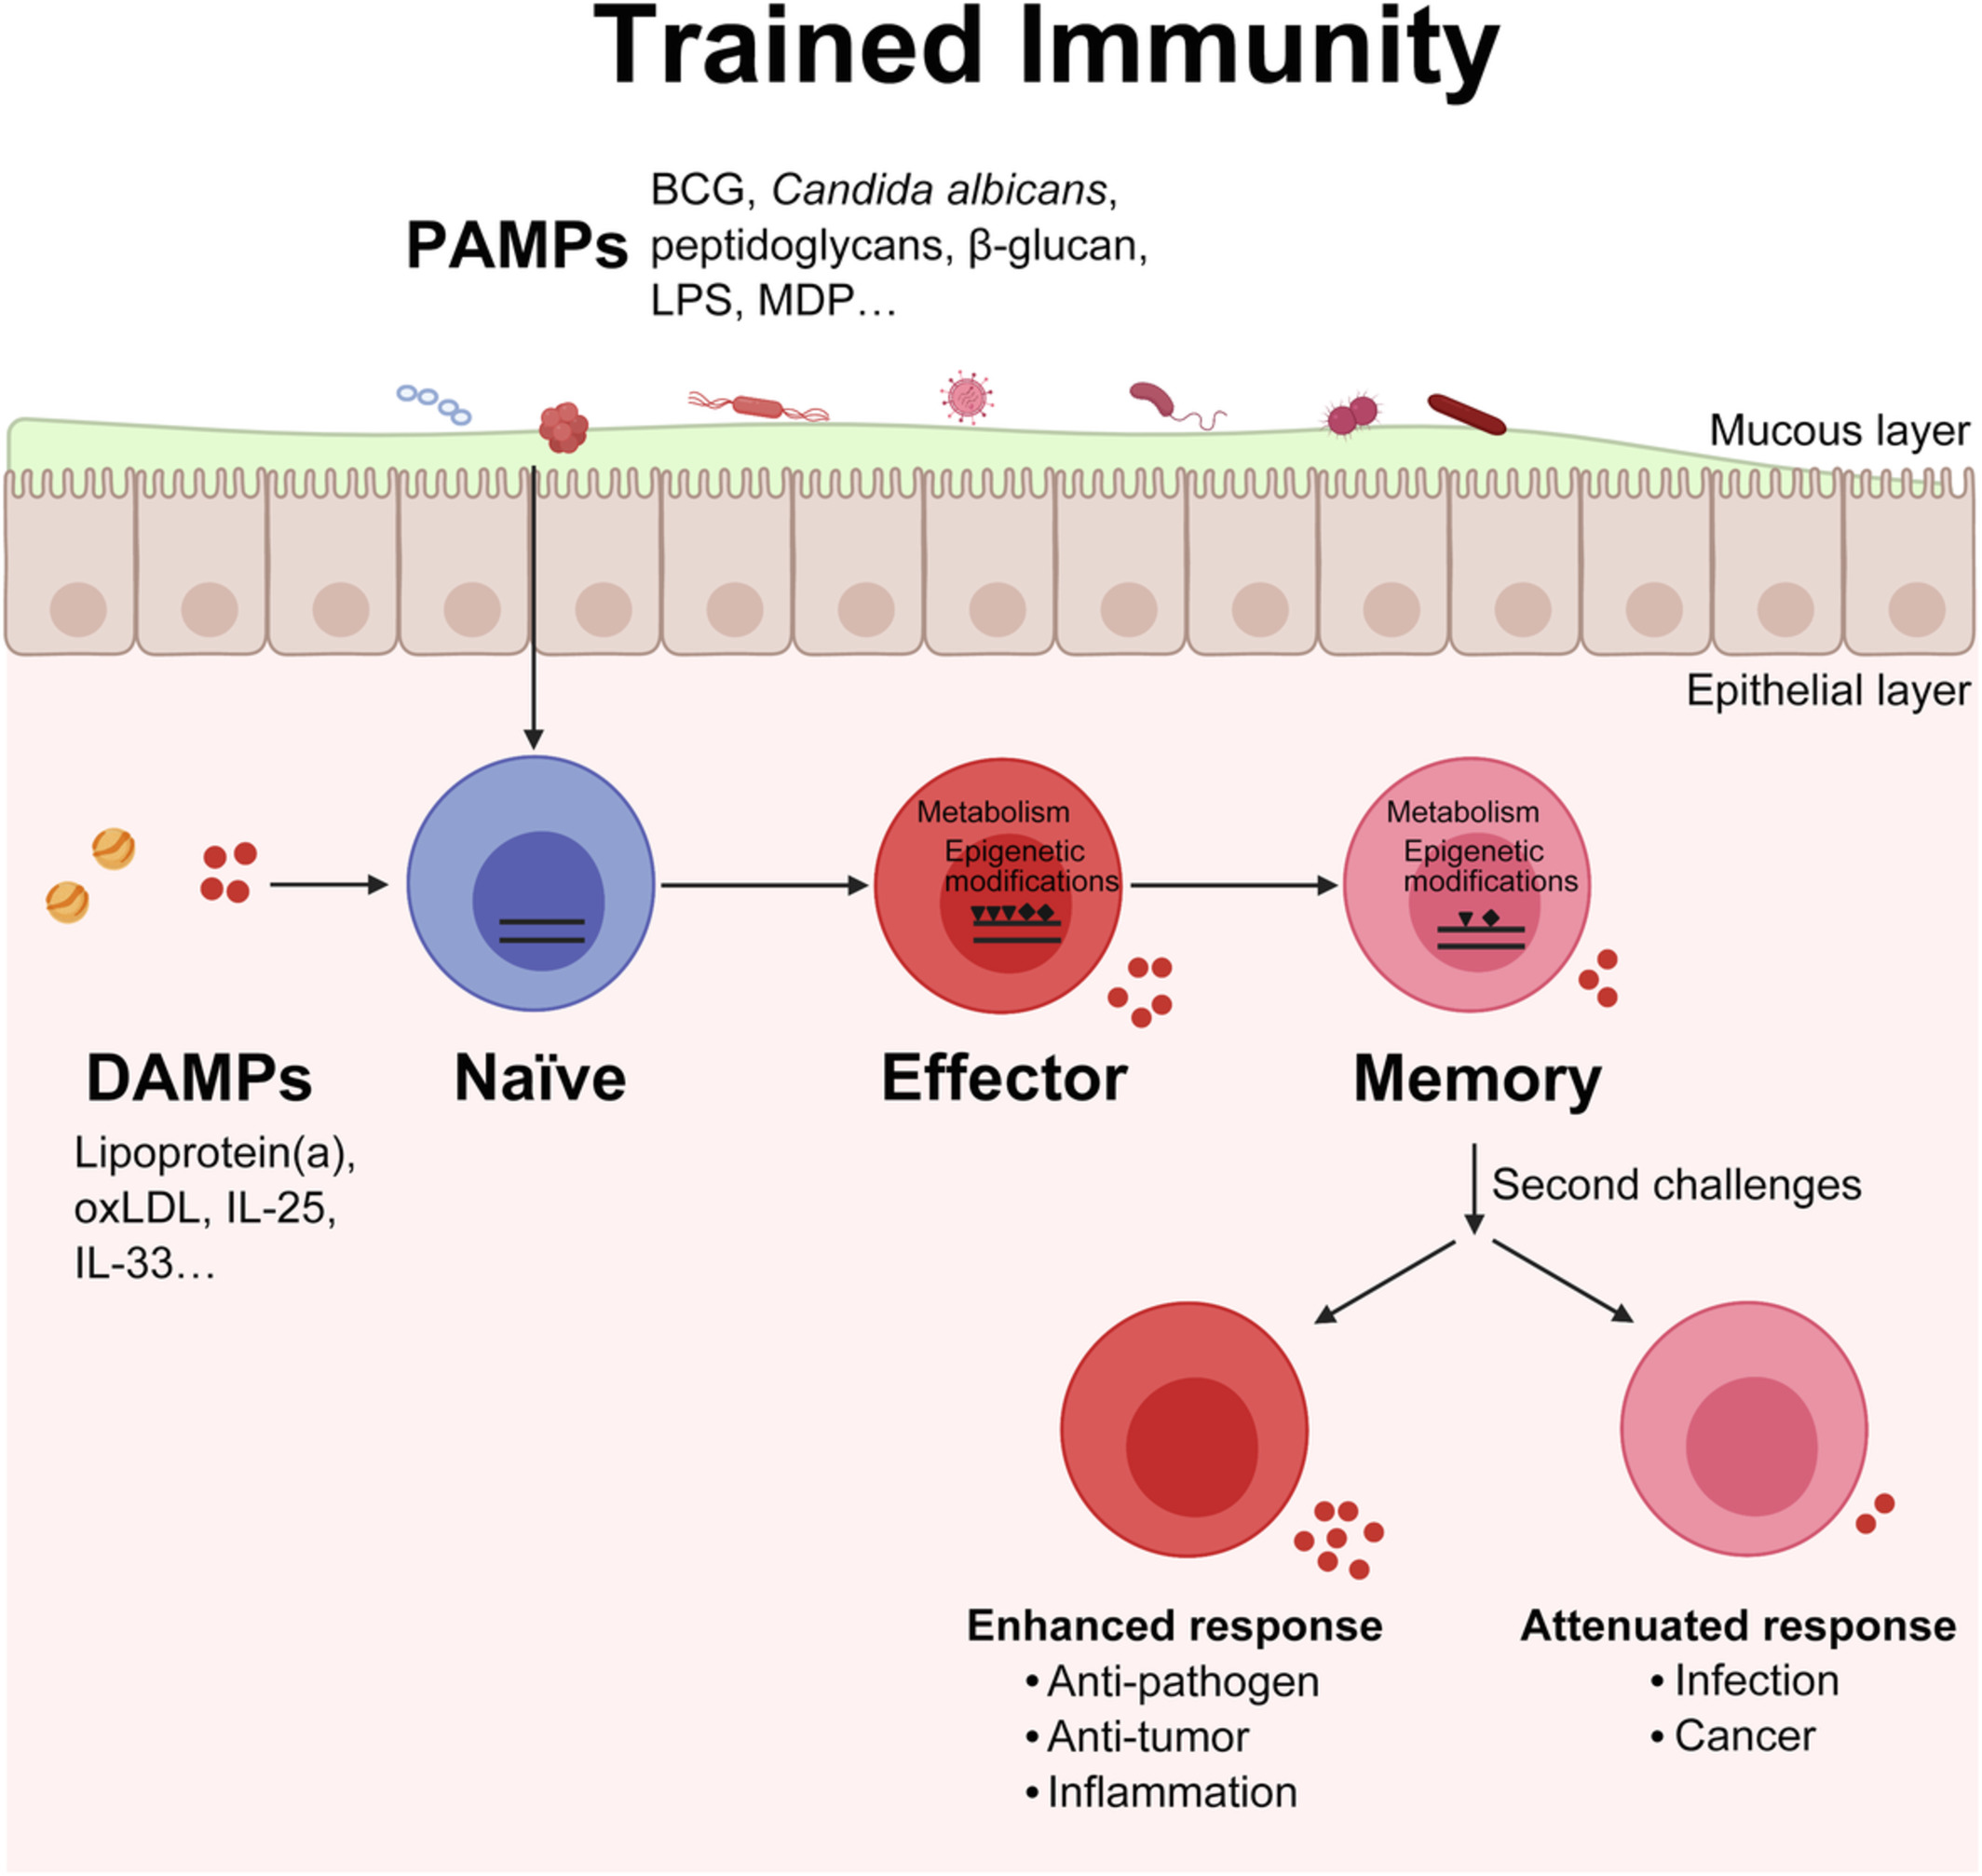 Trained immunity in the mucosal diseases